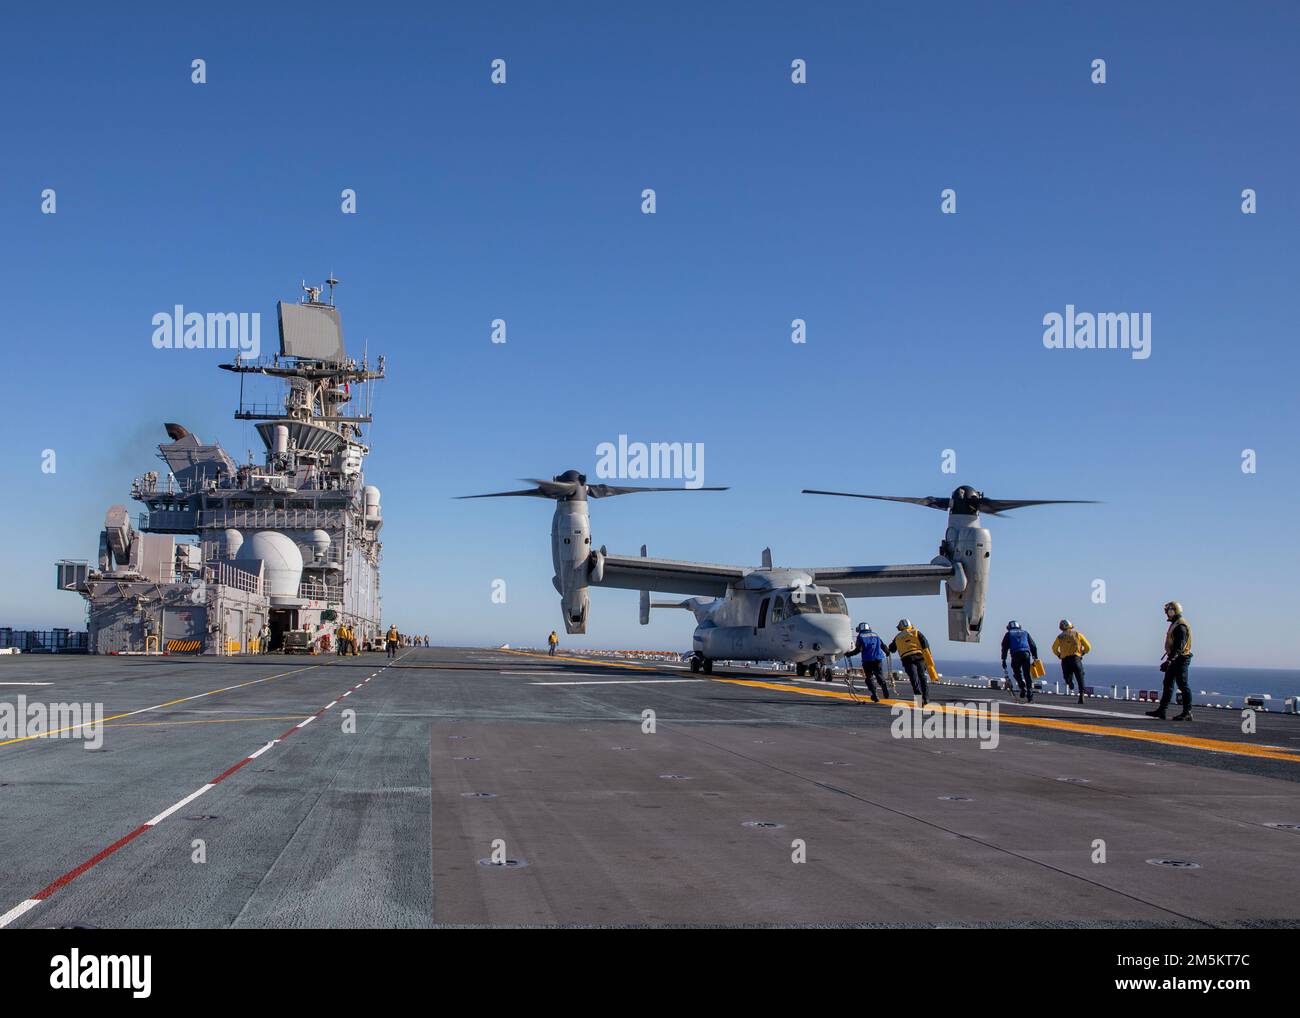 220323-N-IV962-1035    PACIFIC OCEAN (March 23, 2022) – Sailors depart the rotor arc of an MV-22 Osprey, assigned to Marine Medium Tiltrotor Squadron (VMM) 362, aboard amphibious assault ship USS Makin Island (LHD 8), March 23. Makin Island is underway conducting routine operations in U.S. 3rd Fleet. Stock Photo